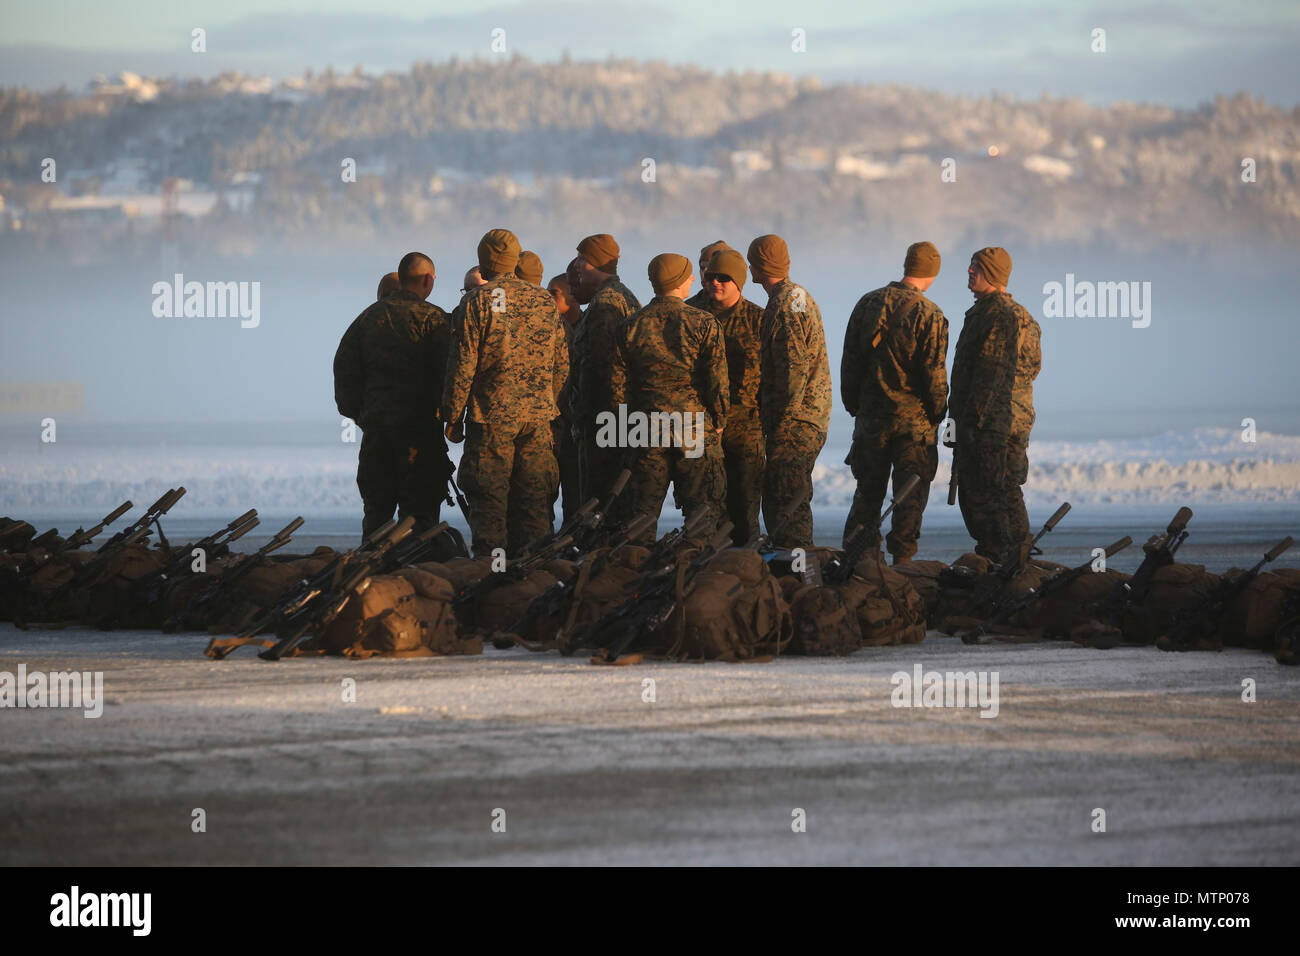 U.S. Marines stage their gear before unloading bags from the plane at Vaernes Garnison, Norway, Jan. 16, 2017. The Marines with Black Sea Rotational Force 17.1 arrived at Vaernes Garnison early in the morning as part of Marine Rotational Force Europe 17.1. (U.S. Marine Corps photo by Lance Cpl. Victoria Ross) Stock Photo